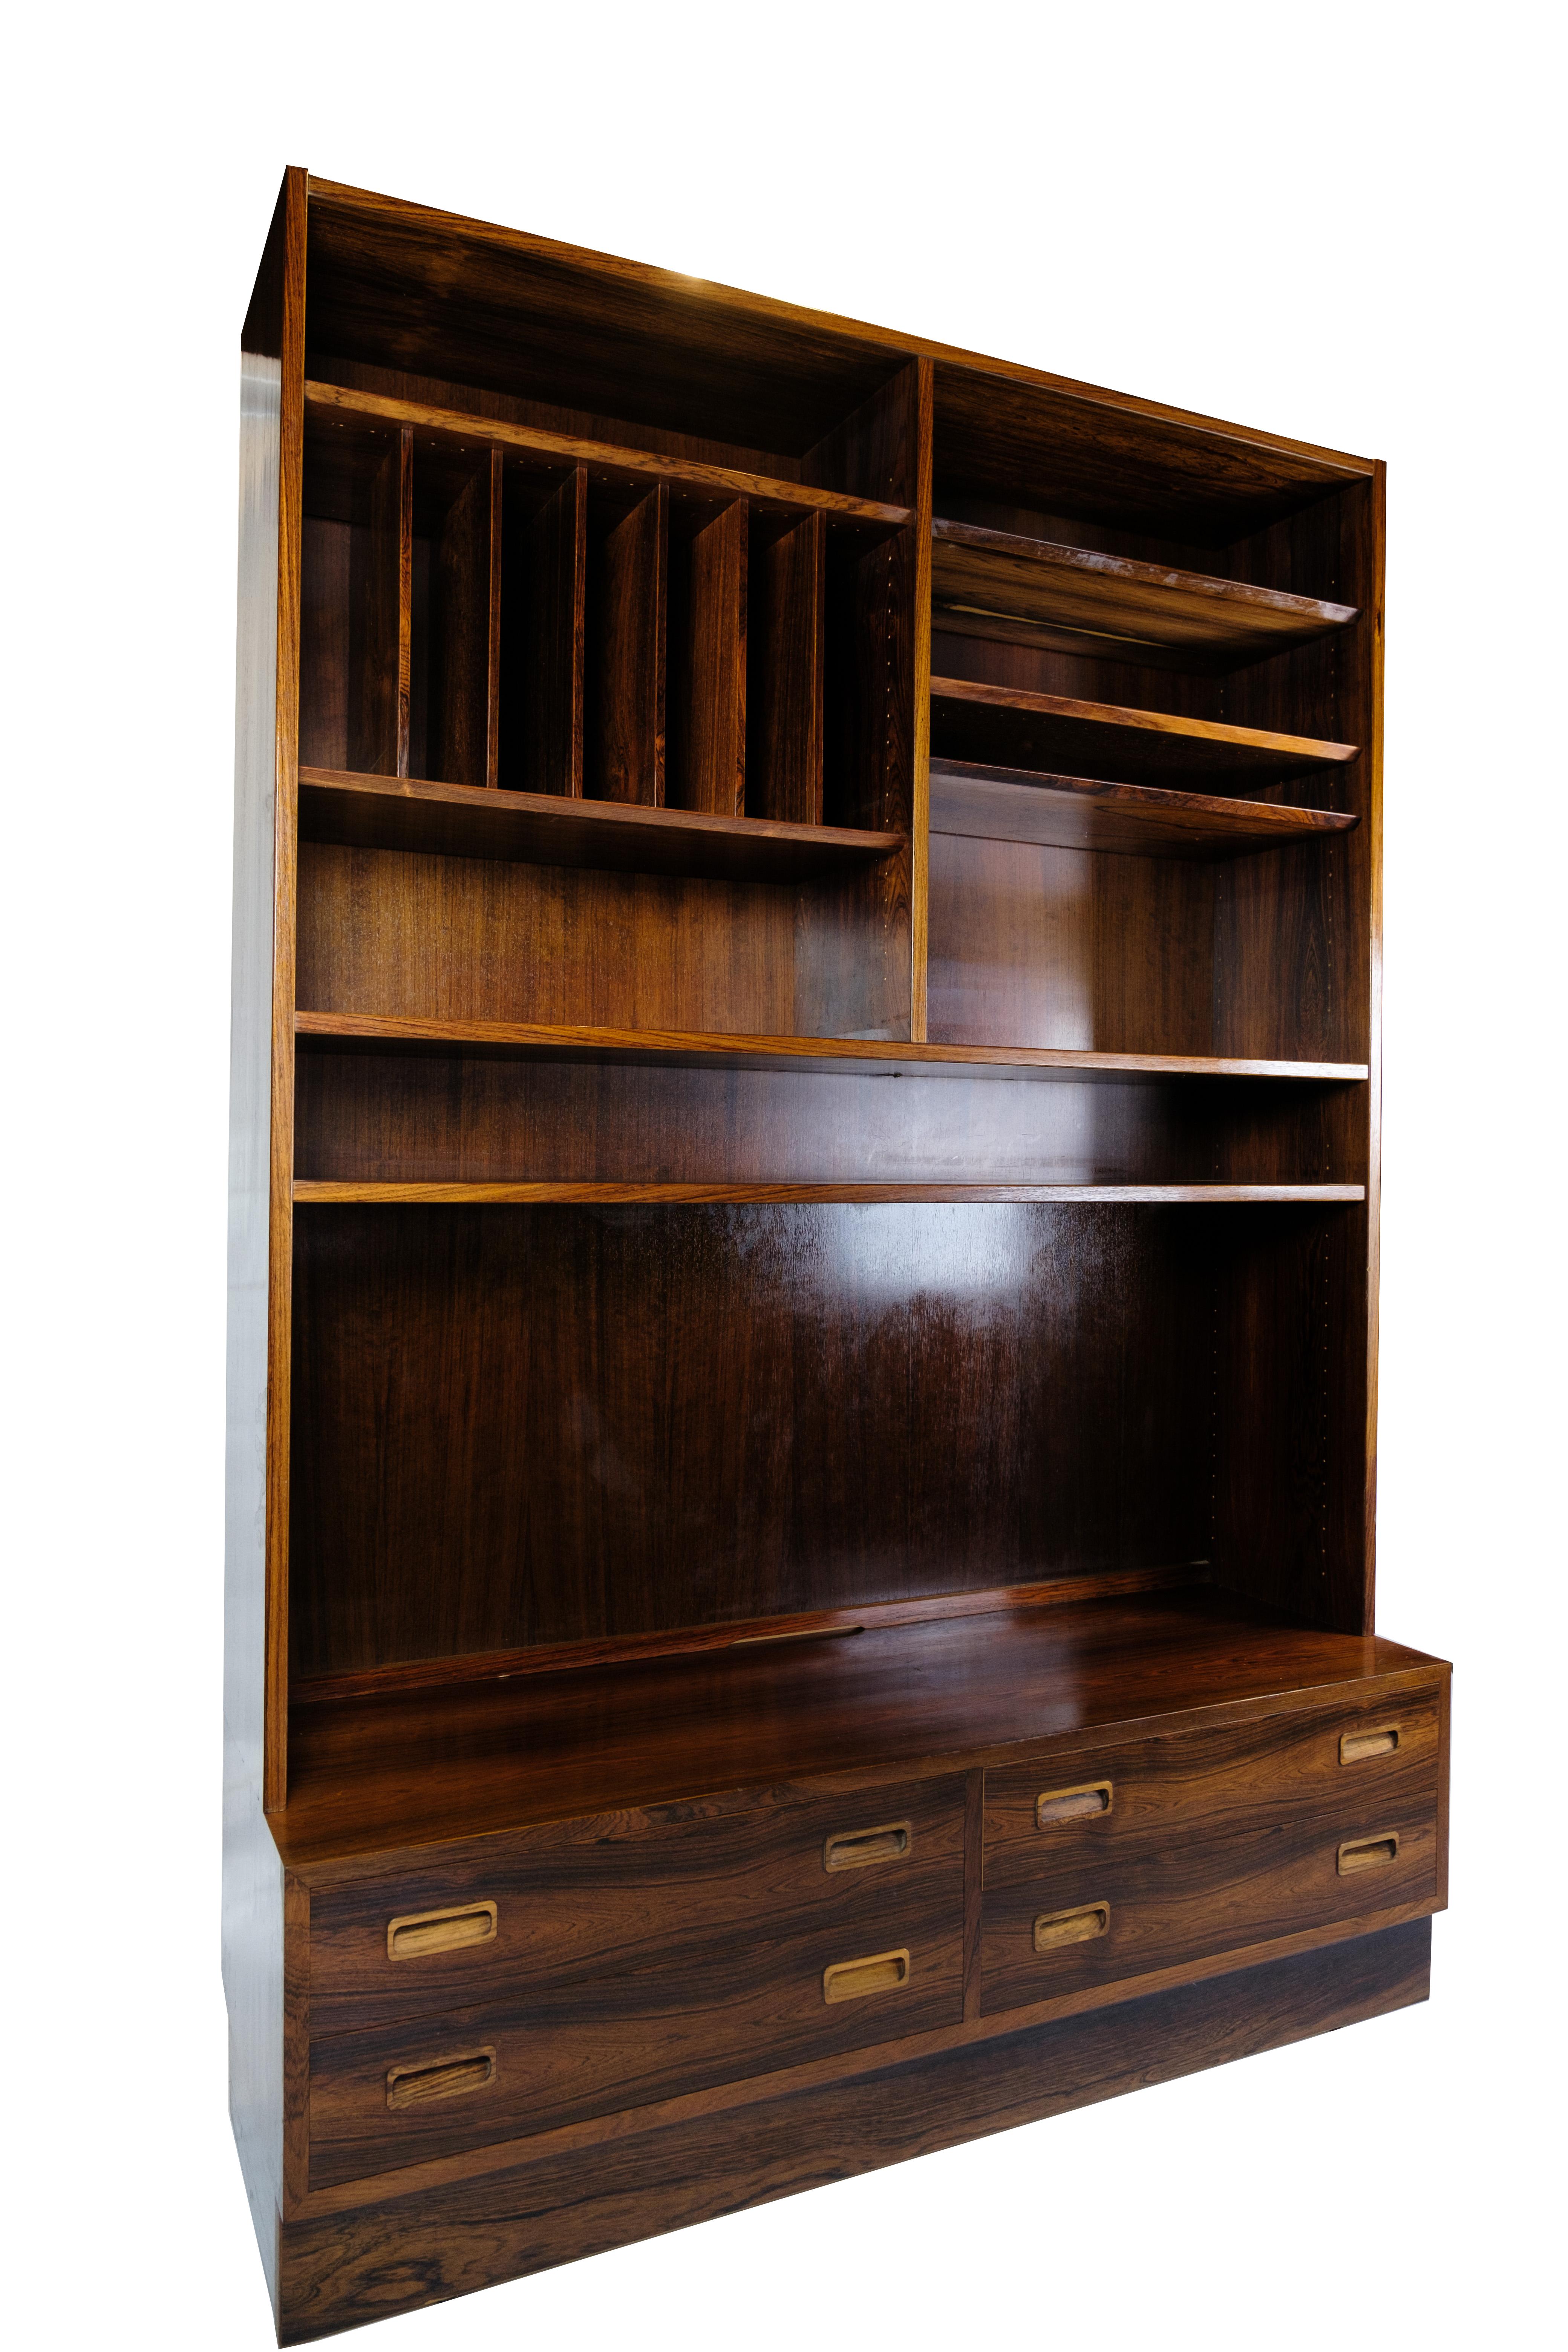 Mid-Century Modern Bookcase Made In Rosewood By Hundevad Funirture Factory From 1960s  For Sale